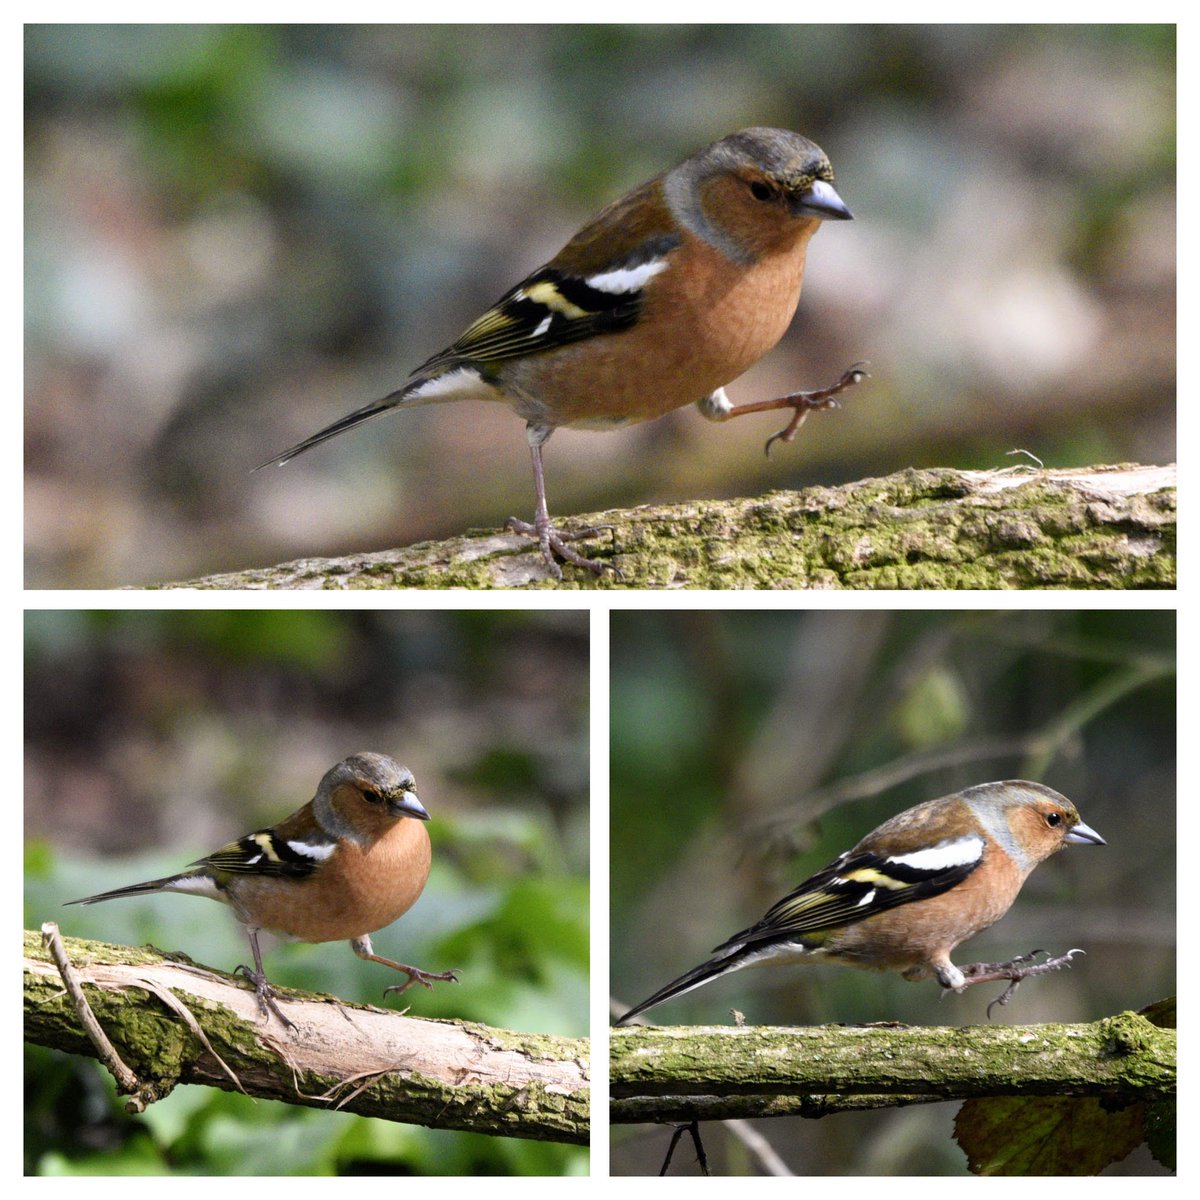 From today..Bobby Chaffinch performing the all new Hip Hop moves trending around the woods today #birds #nature #photography